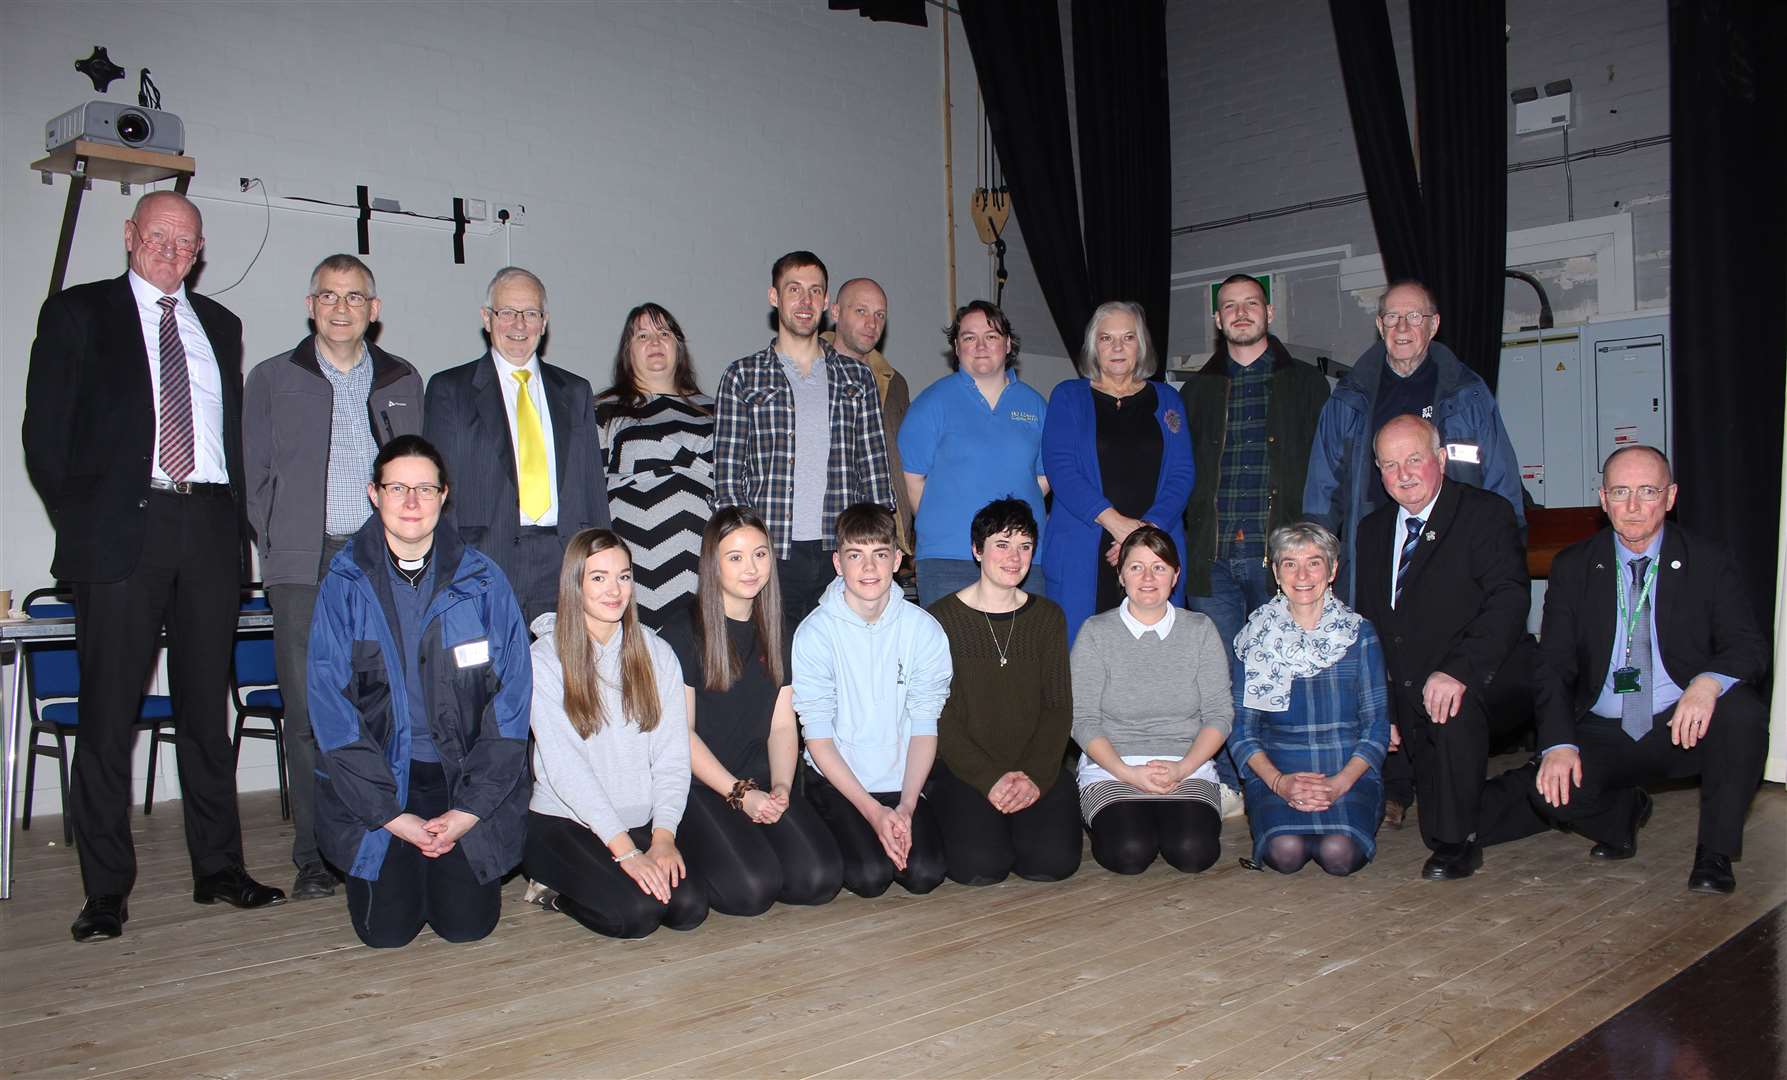 Winners in the sixth Your Cash Your Caithness on the stage at Thurso High School after Saturday's event, with the compere, civic leader Willie Mackay (kneeling, second from right), and Highland Council's Caithness ward manager Alex Macmanus (right). Picture: Alan Hendry